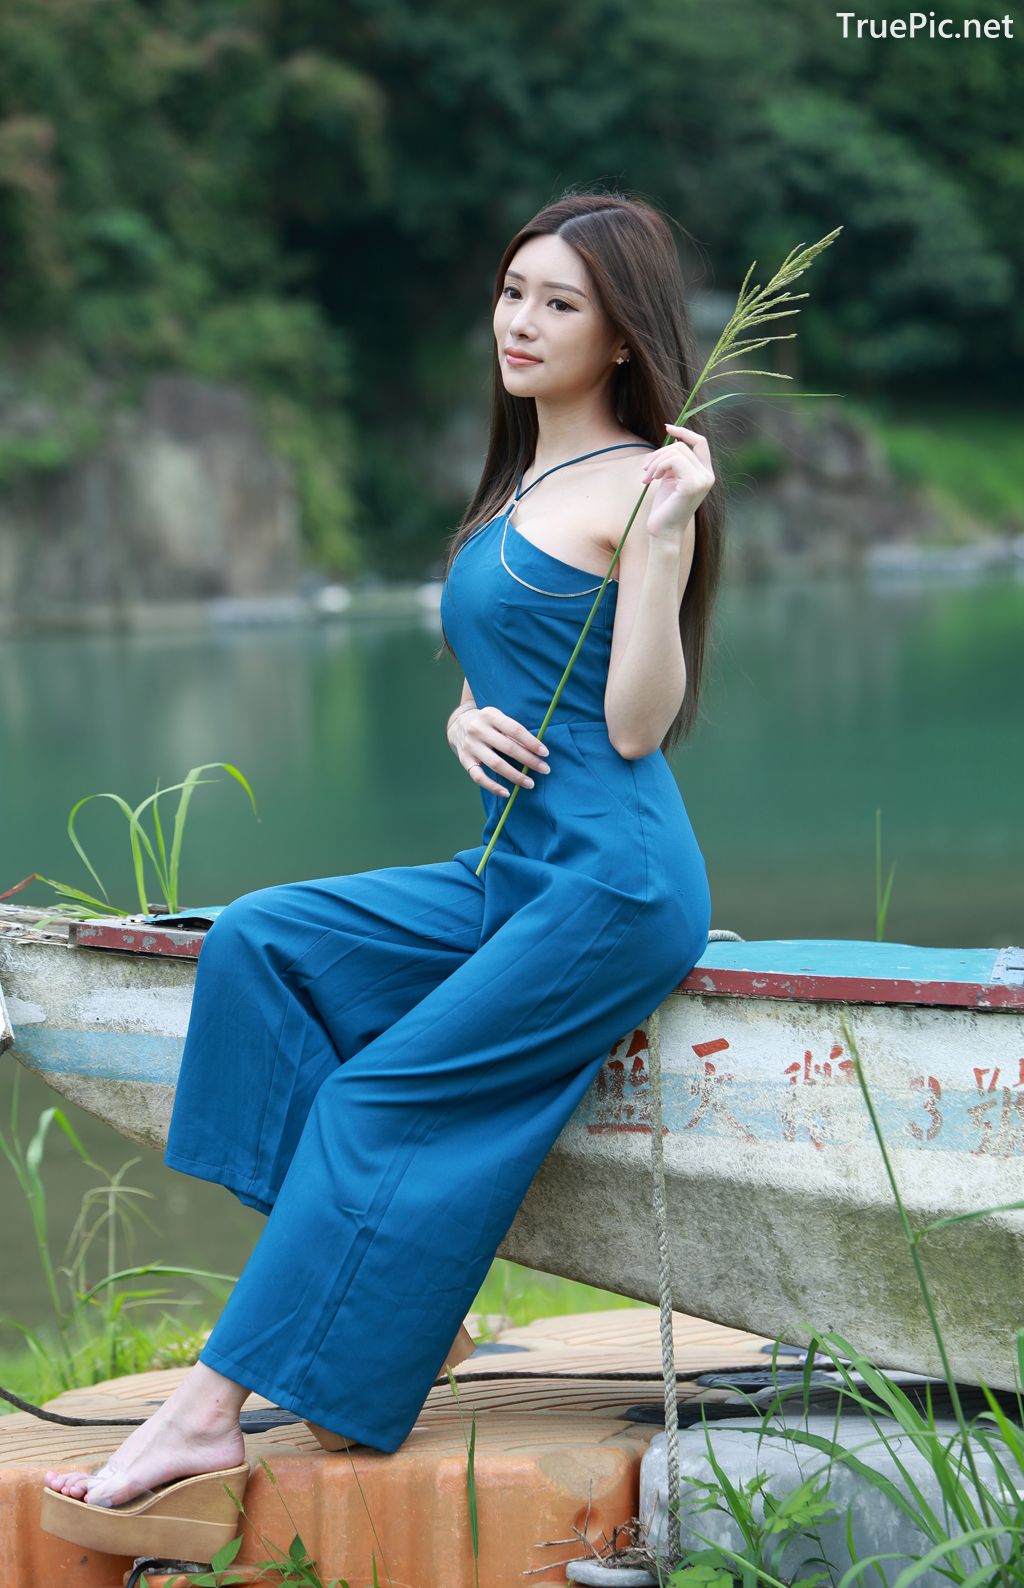 Image-Taiwanese-Pure-Girl-承容-Young-Beautiful-And-Lovely-TruePic.net- Picture-31